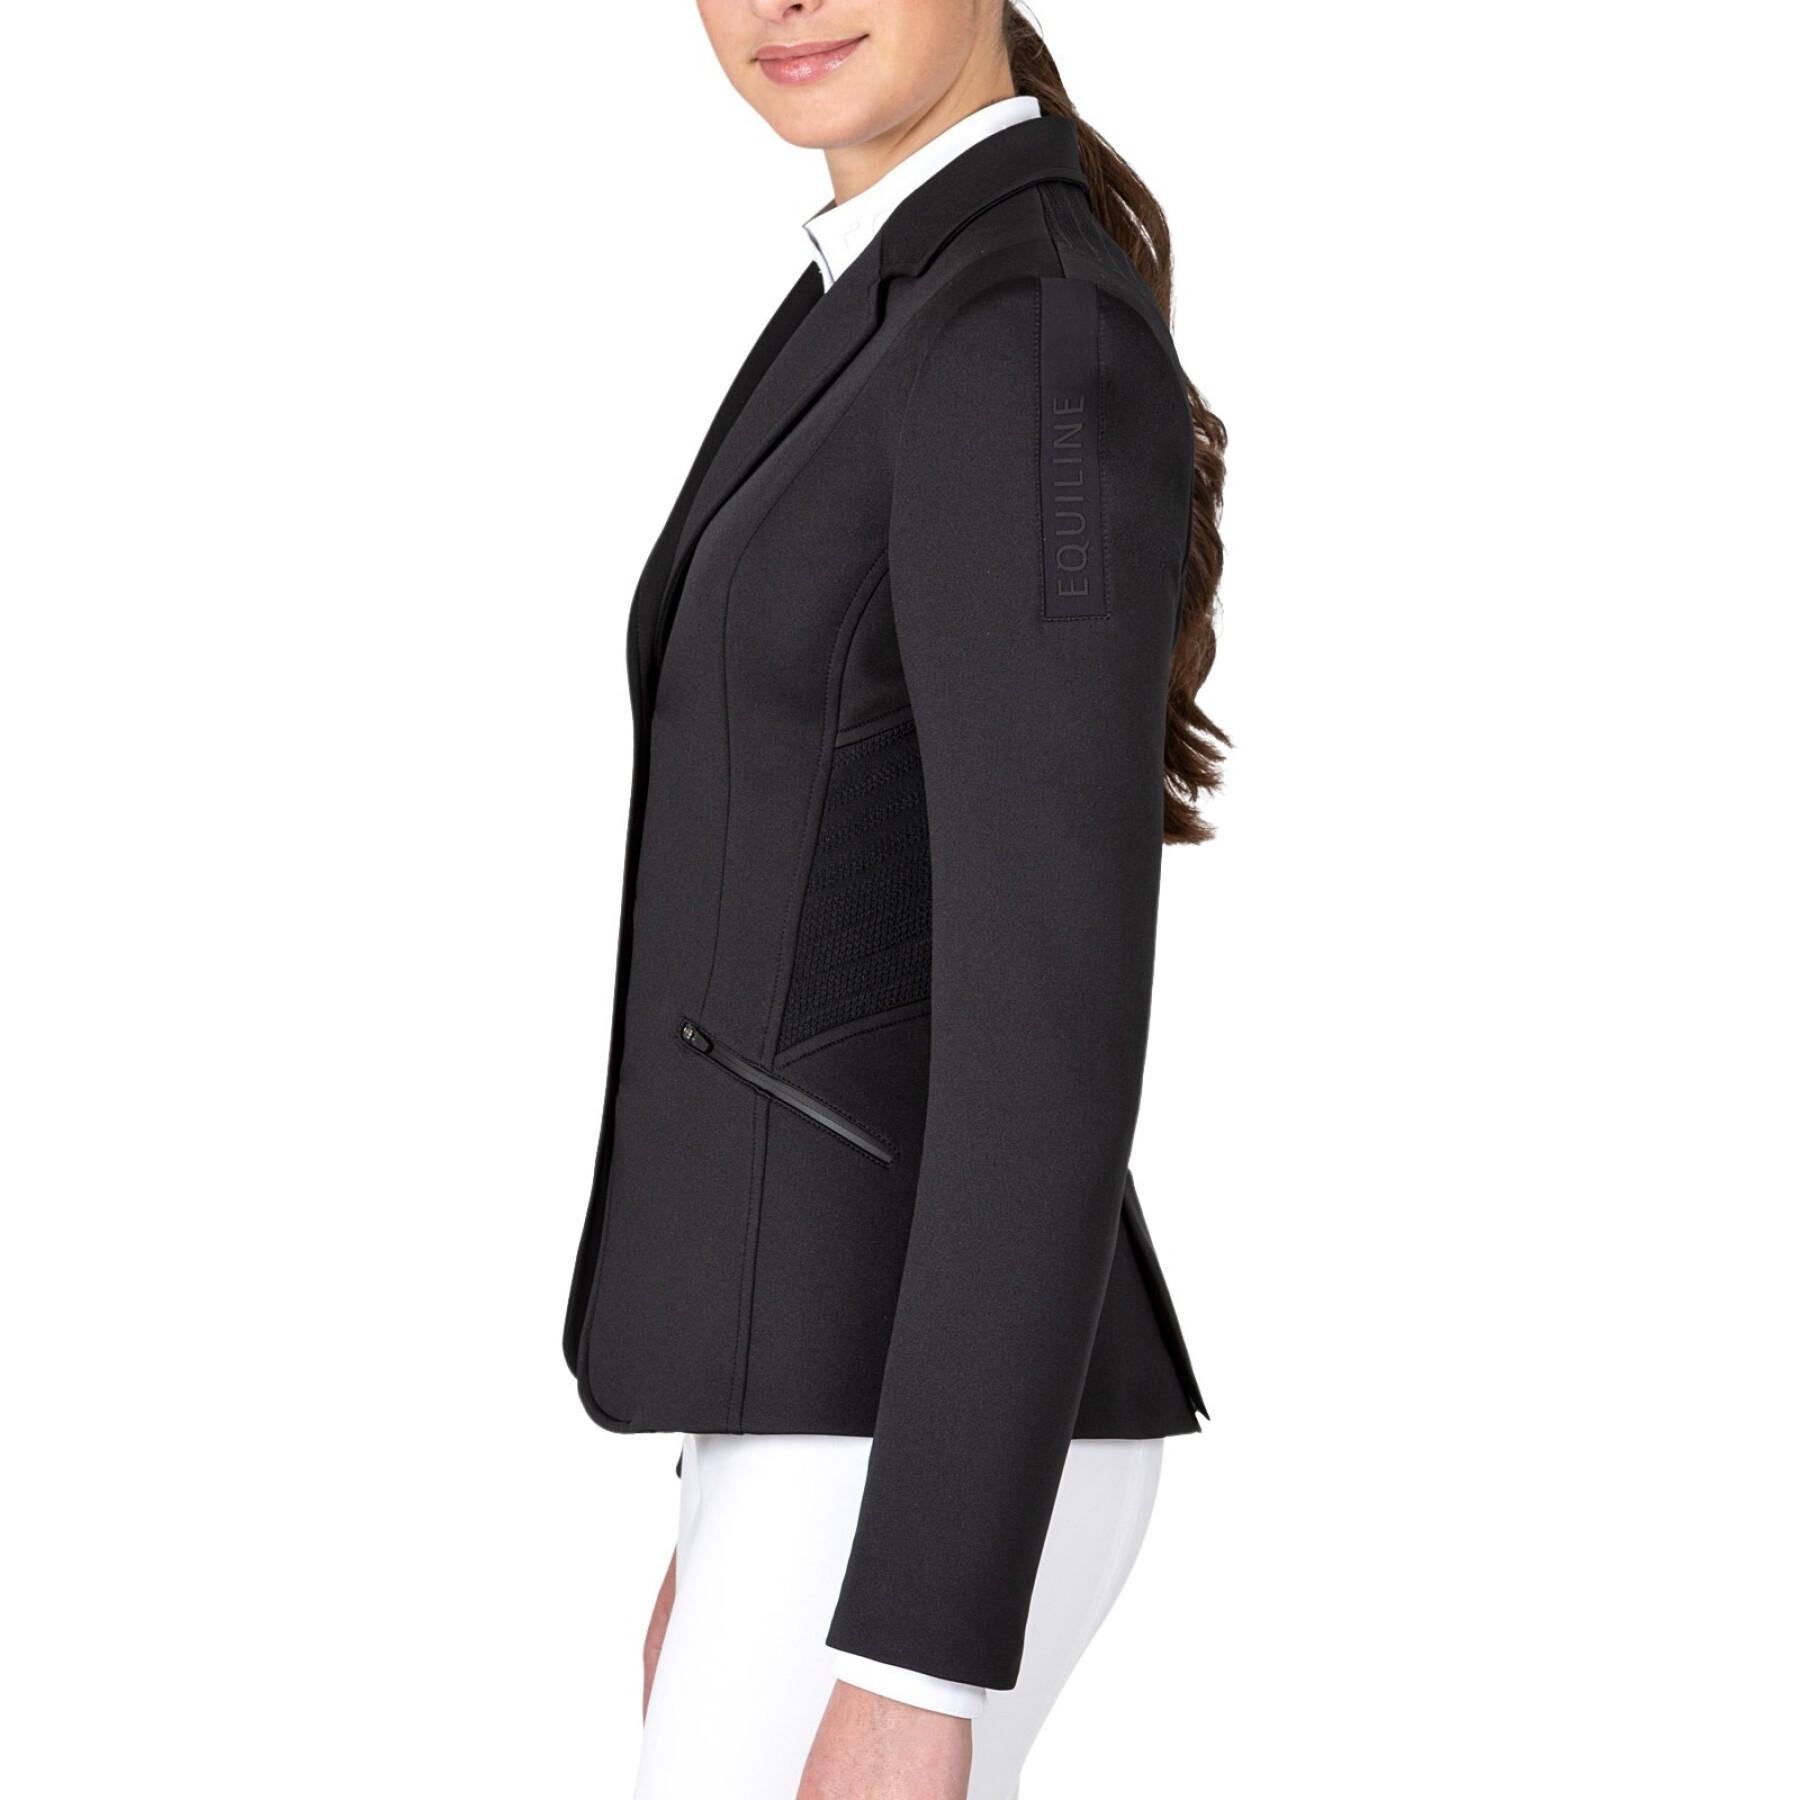 Riding jacket for women Equiline Celloc